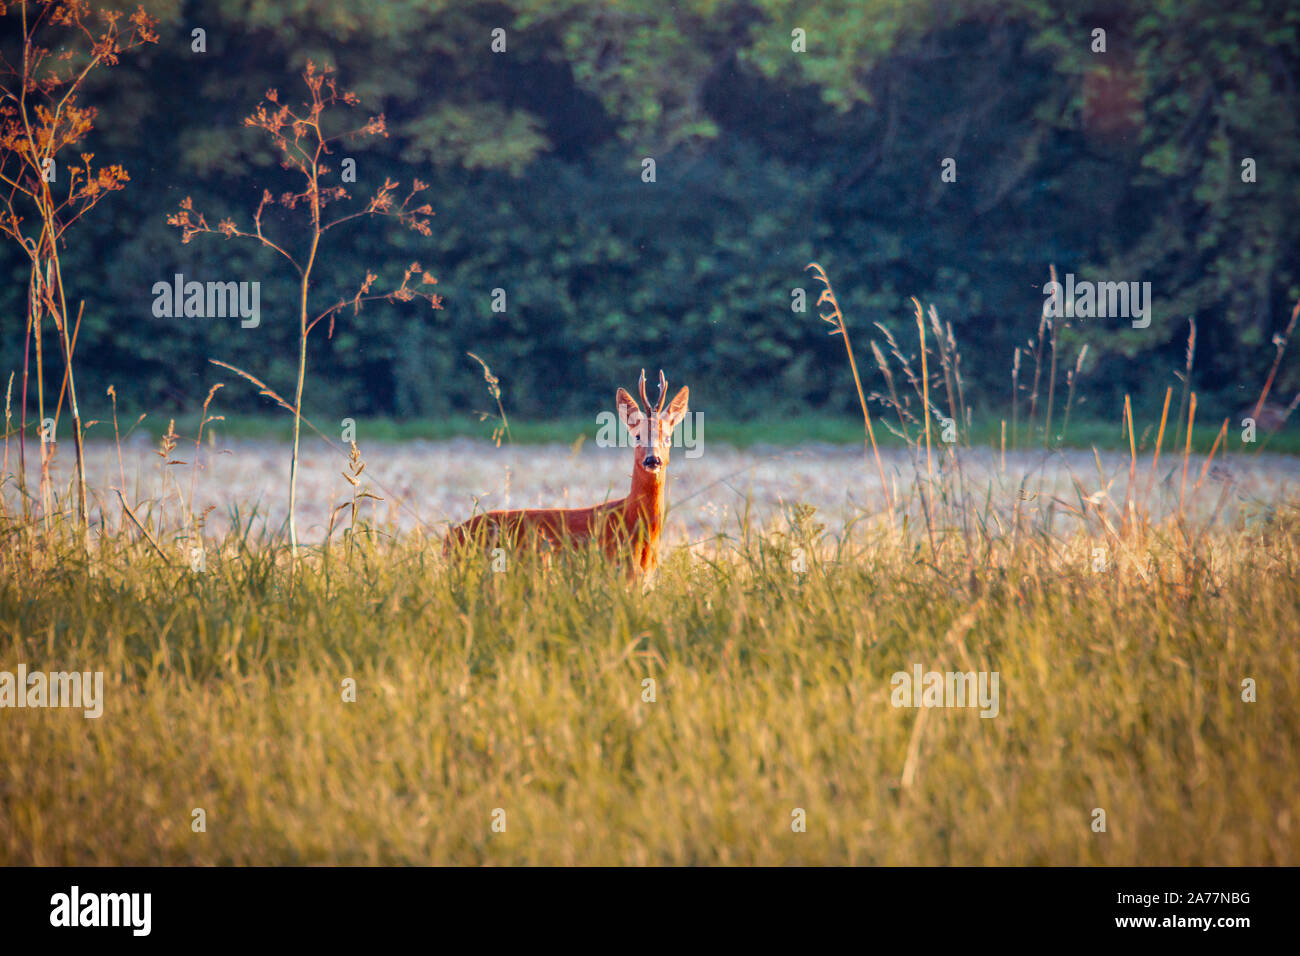 Roe Buck photographed in Worms, Germany Stock Photo